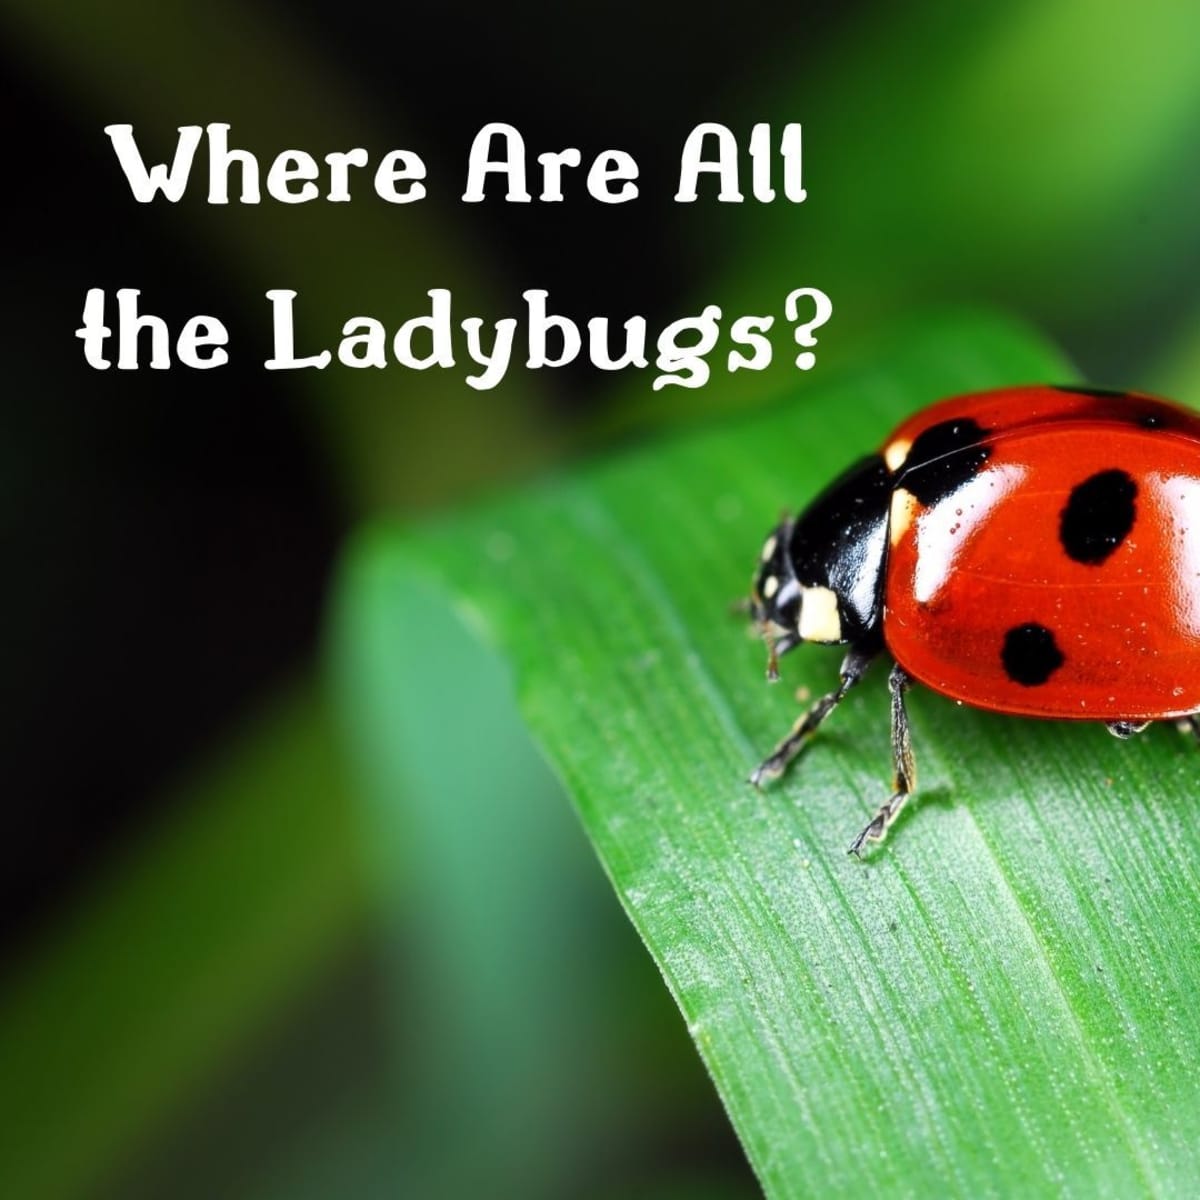 Native ladybugs lose ground to foreign species